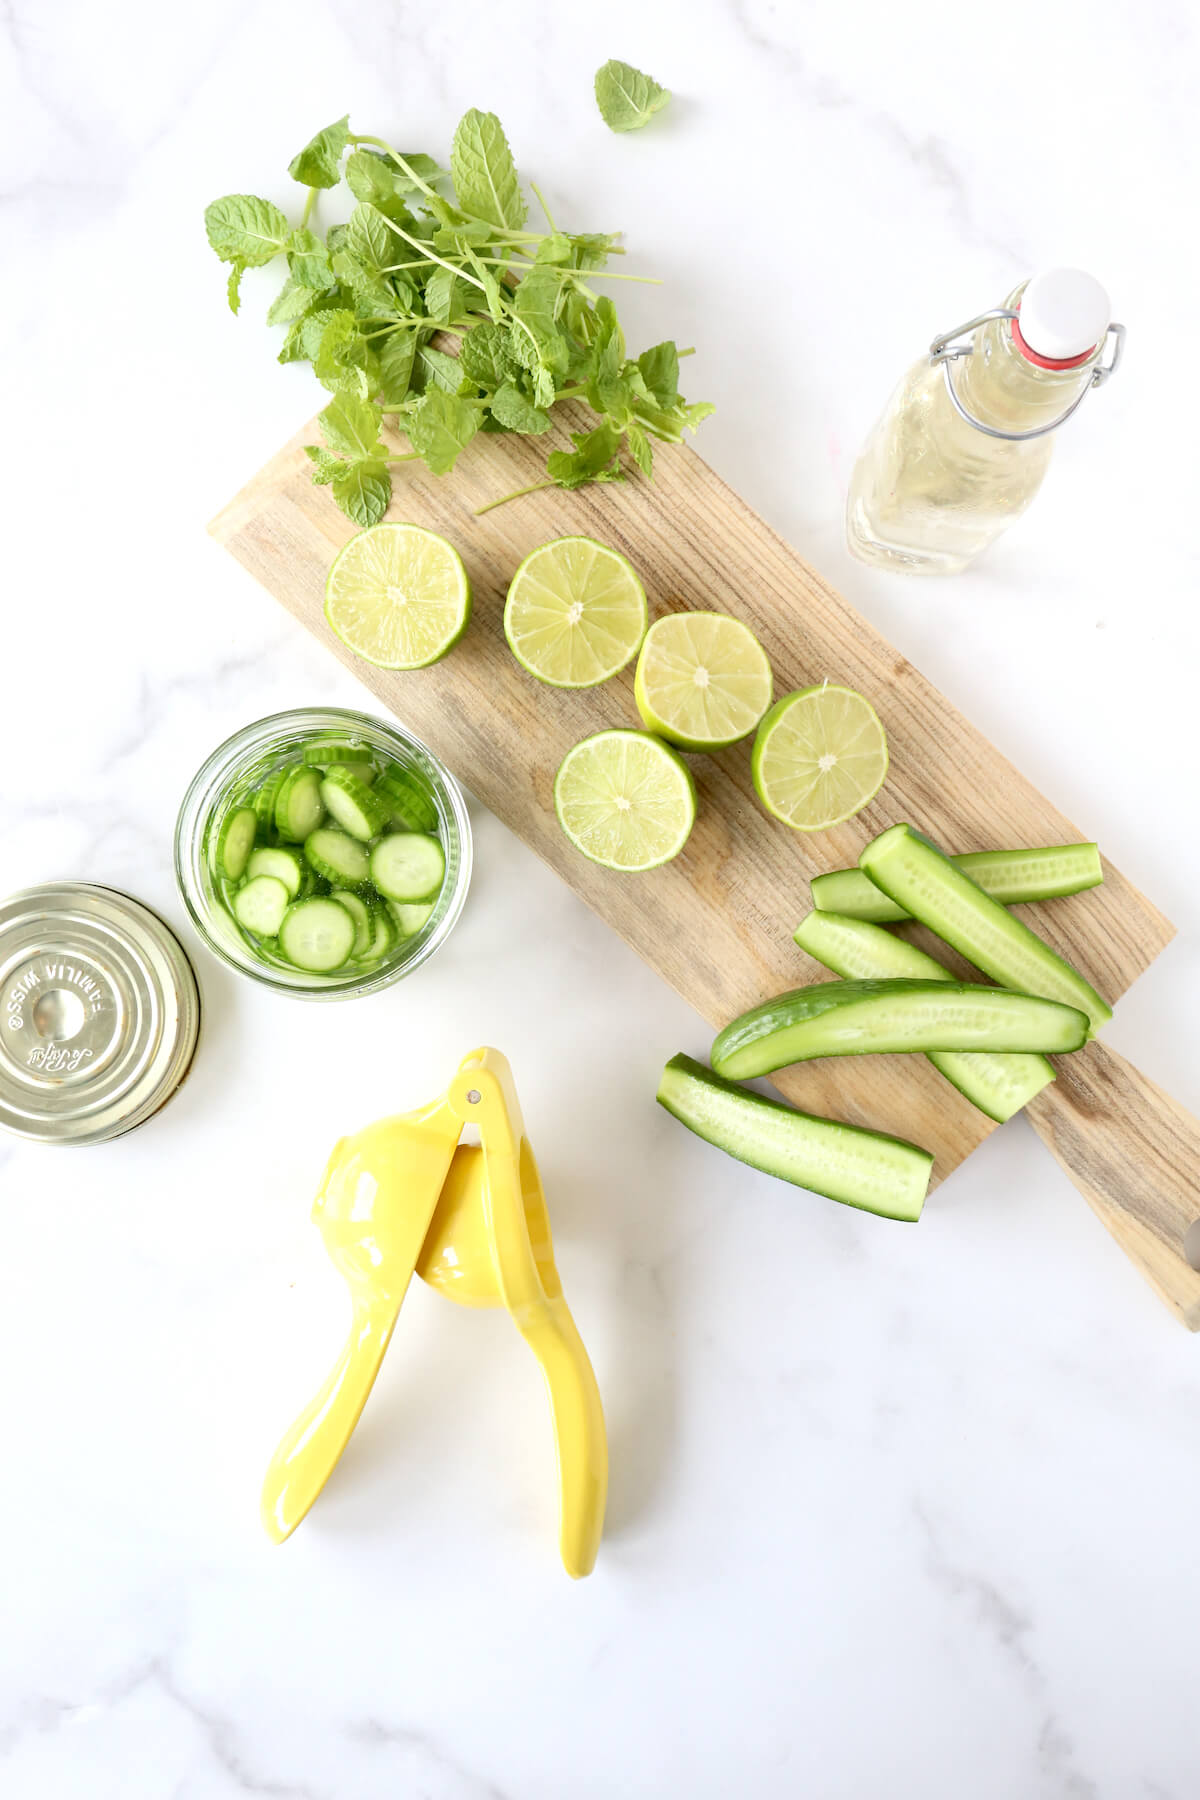 A wood board with sliced limes, cucumbers, mint a juicer and a jar of simple syrup.  